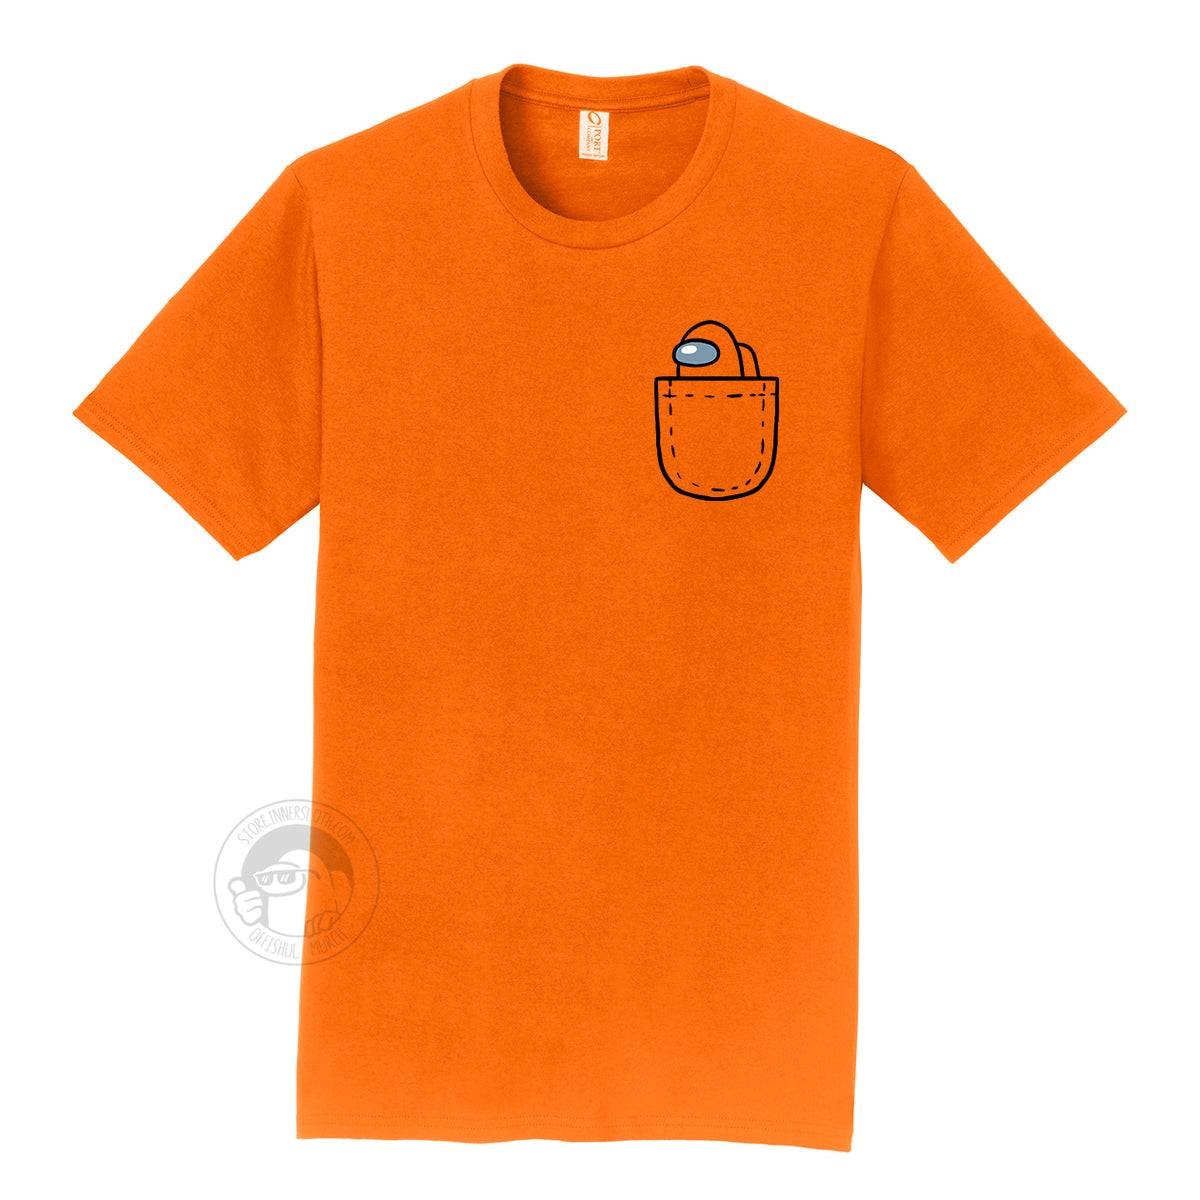 A product photograph of the Among Us: Mini Crewmate Pocket Tee in orange. The shirt art depicts a fake pocket and a small crewmate peeking out of it. The crewmate is the same color as the rest of the shirt.